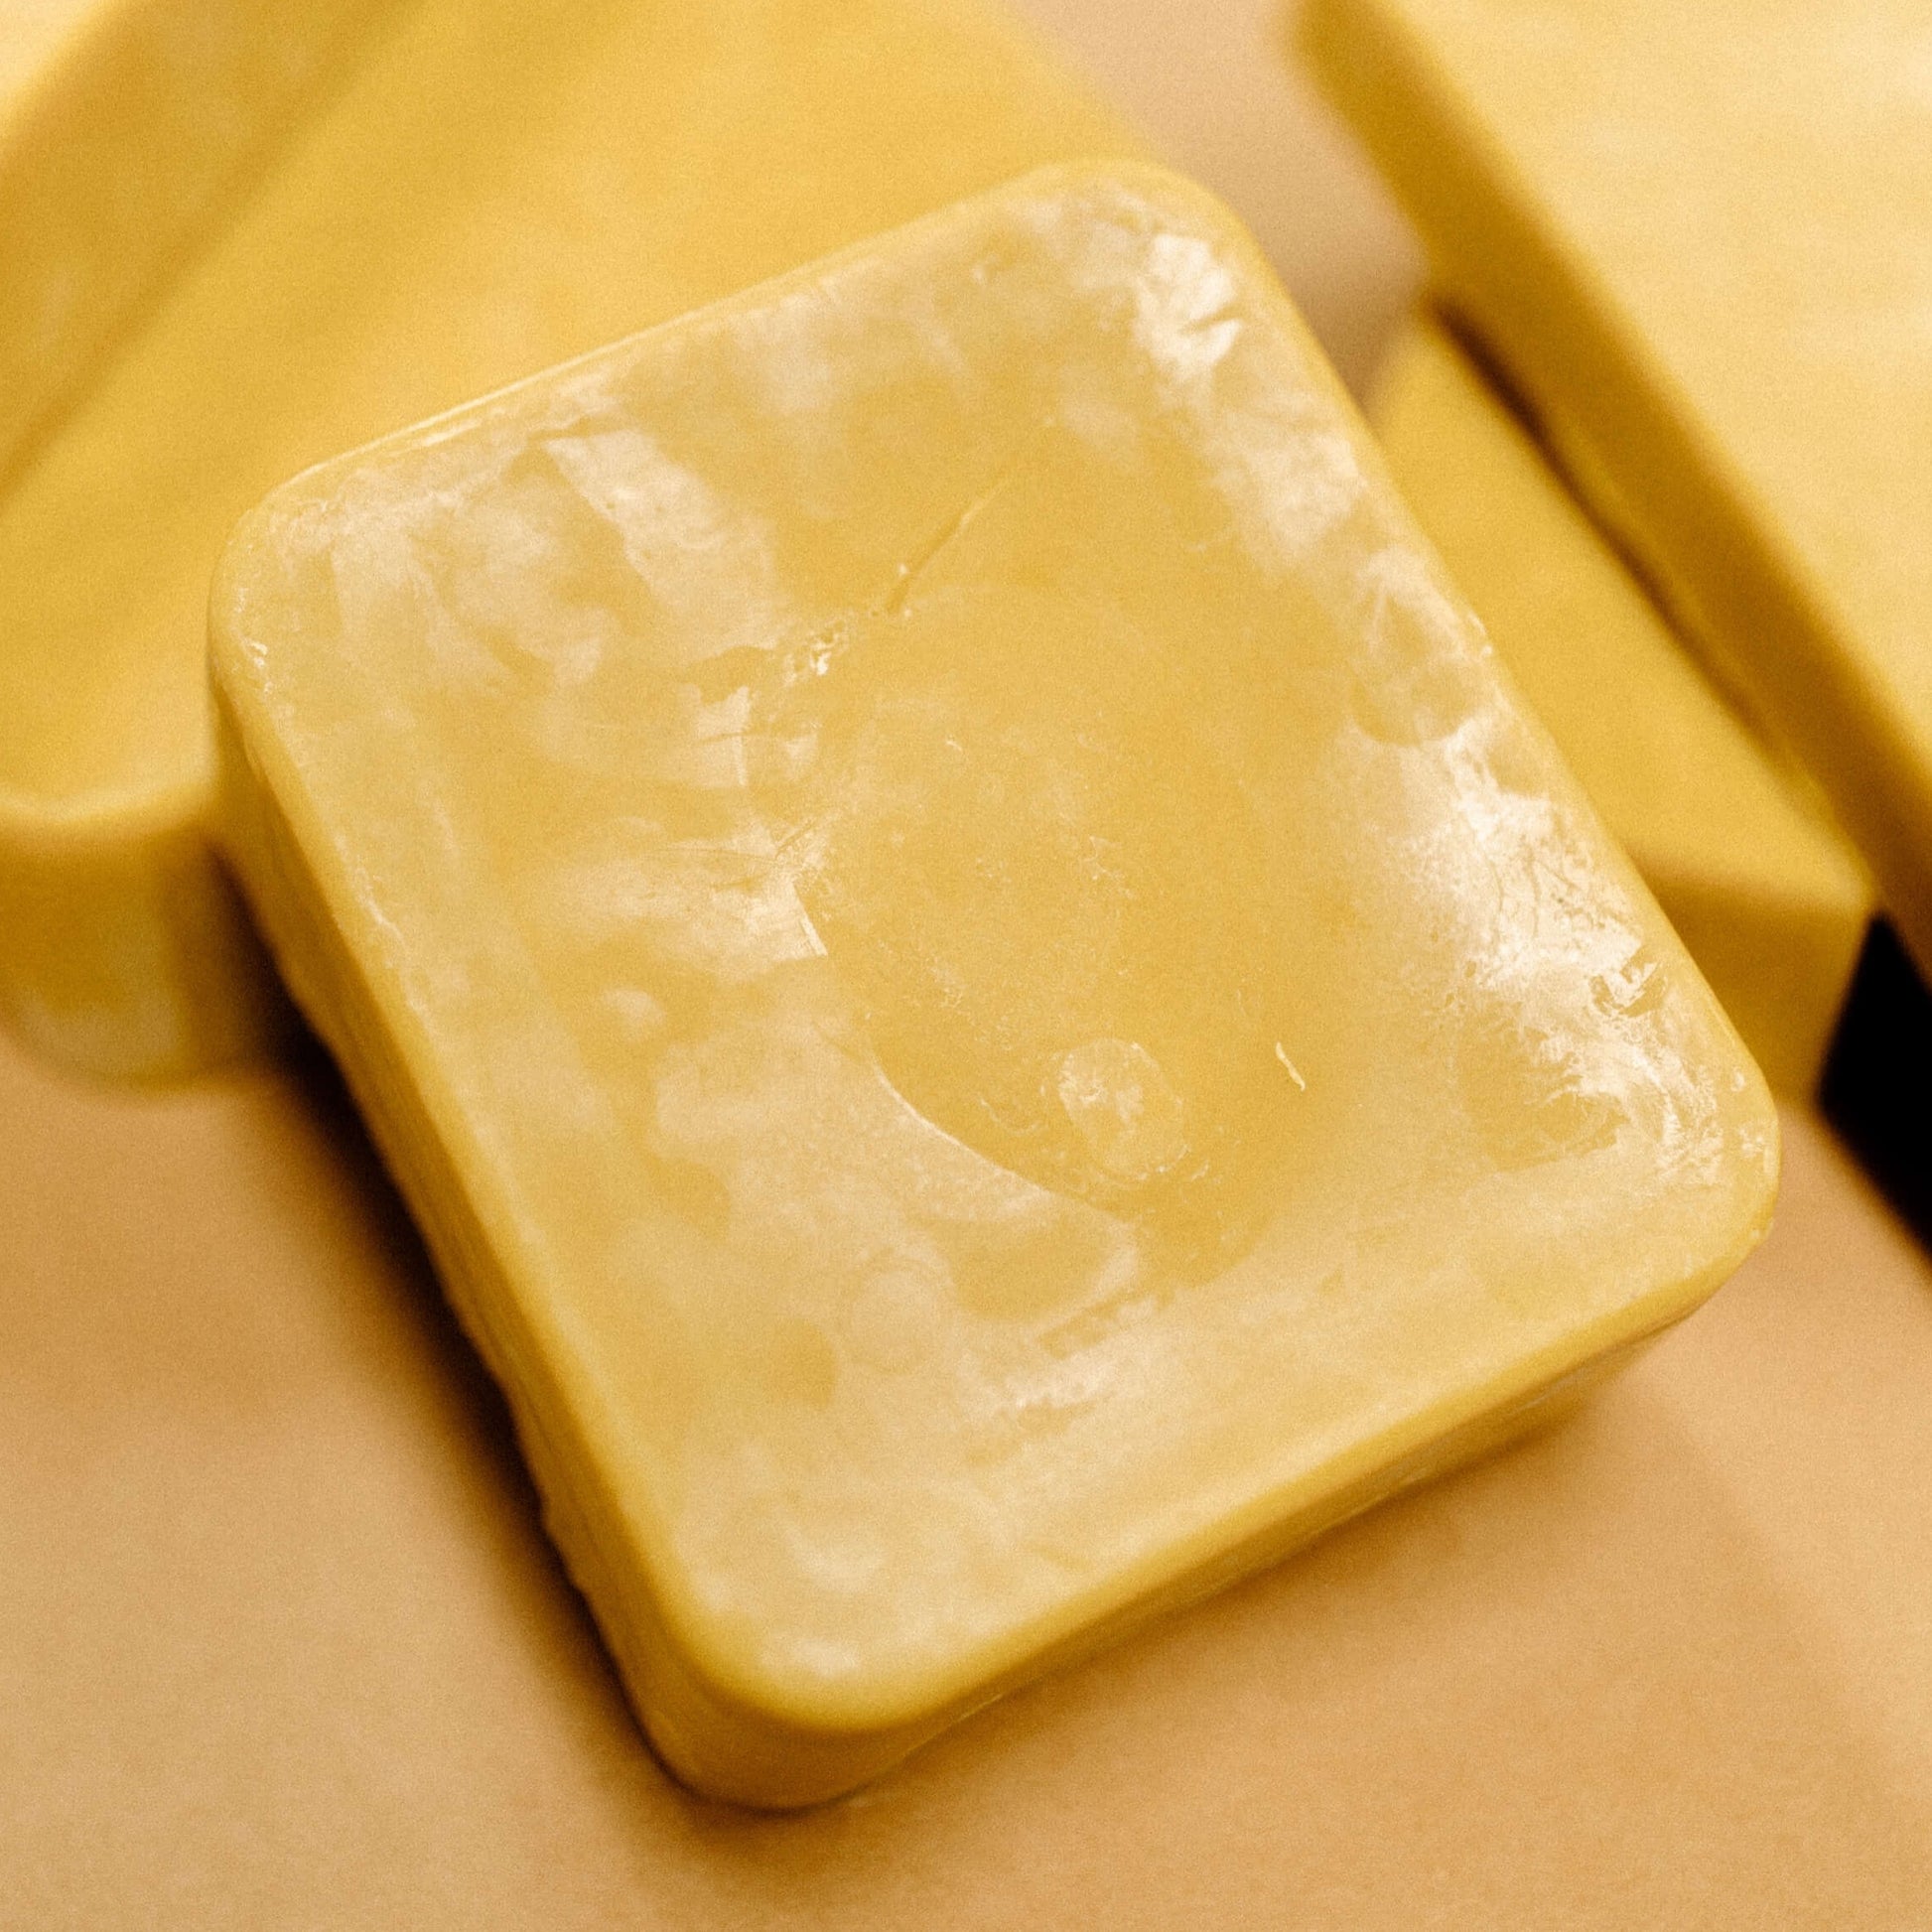 A yellow block of beeswax propped up against other blocks.